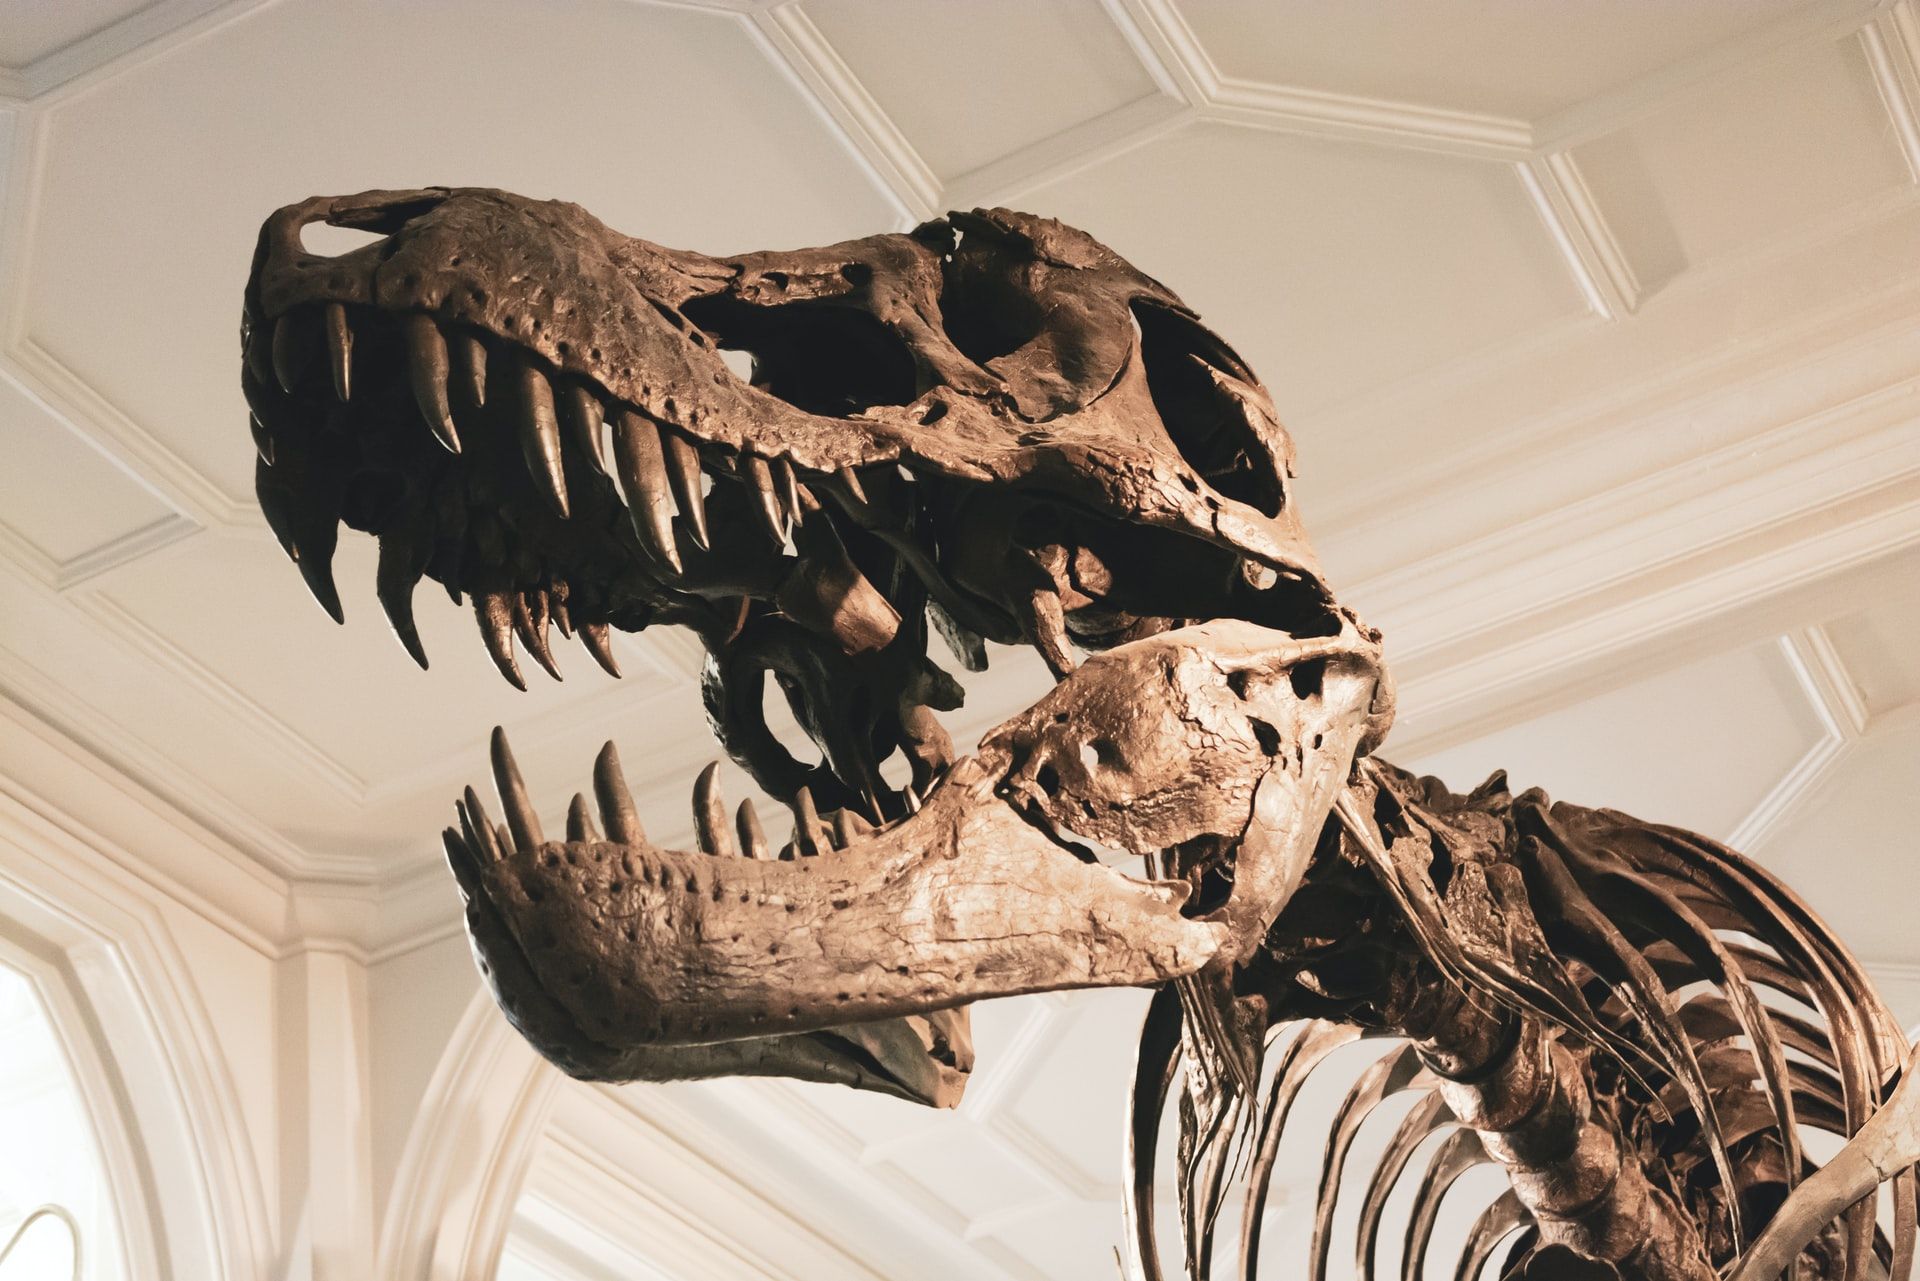 The first T-Rex fossil was found in 1902 in Hell Creek, Montana.